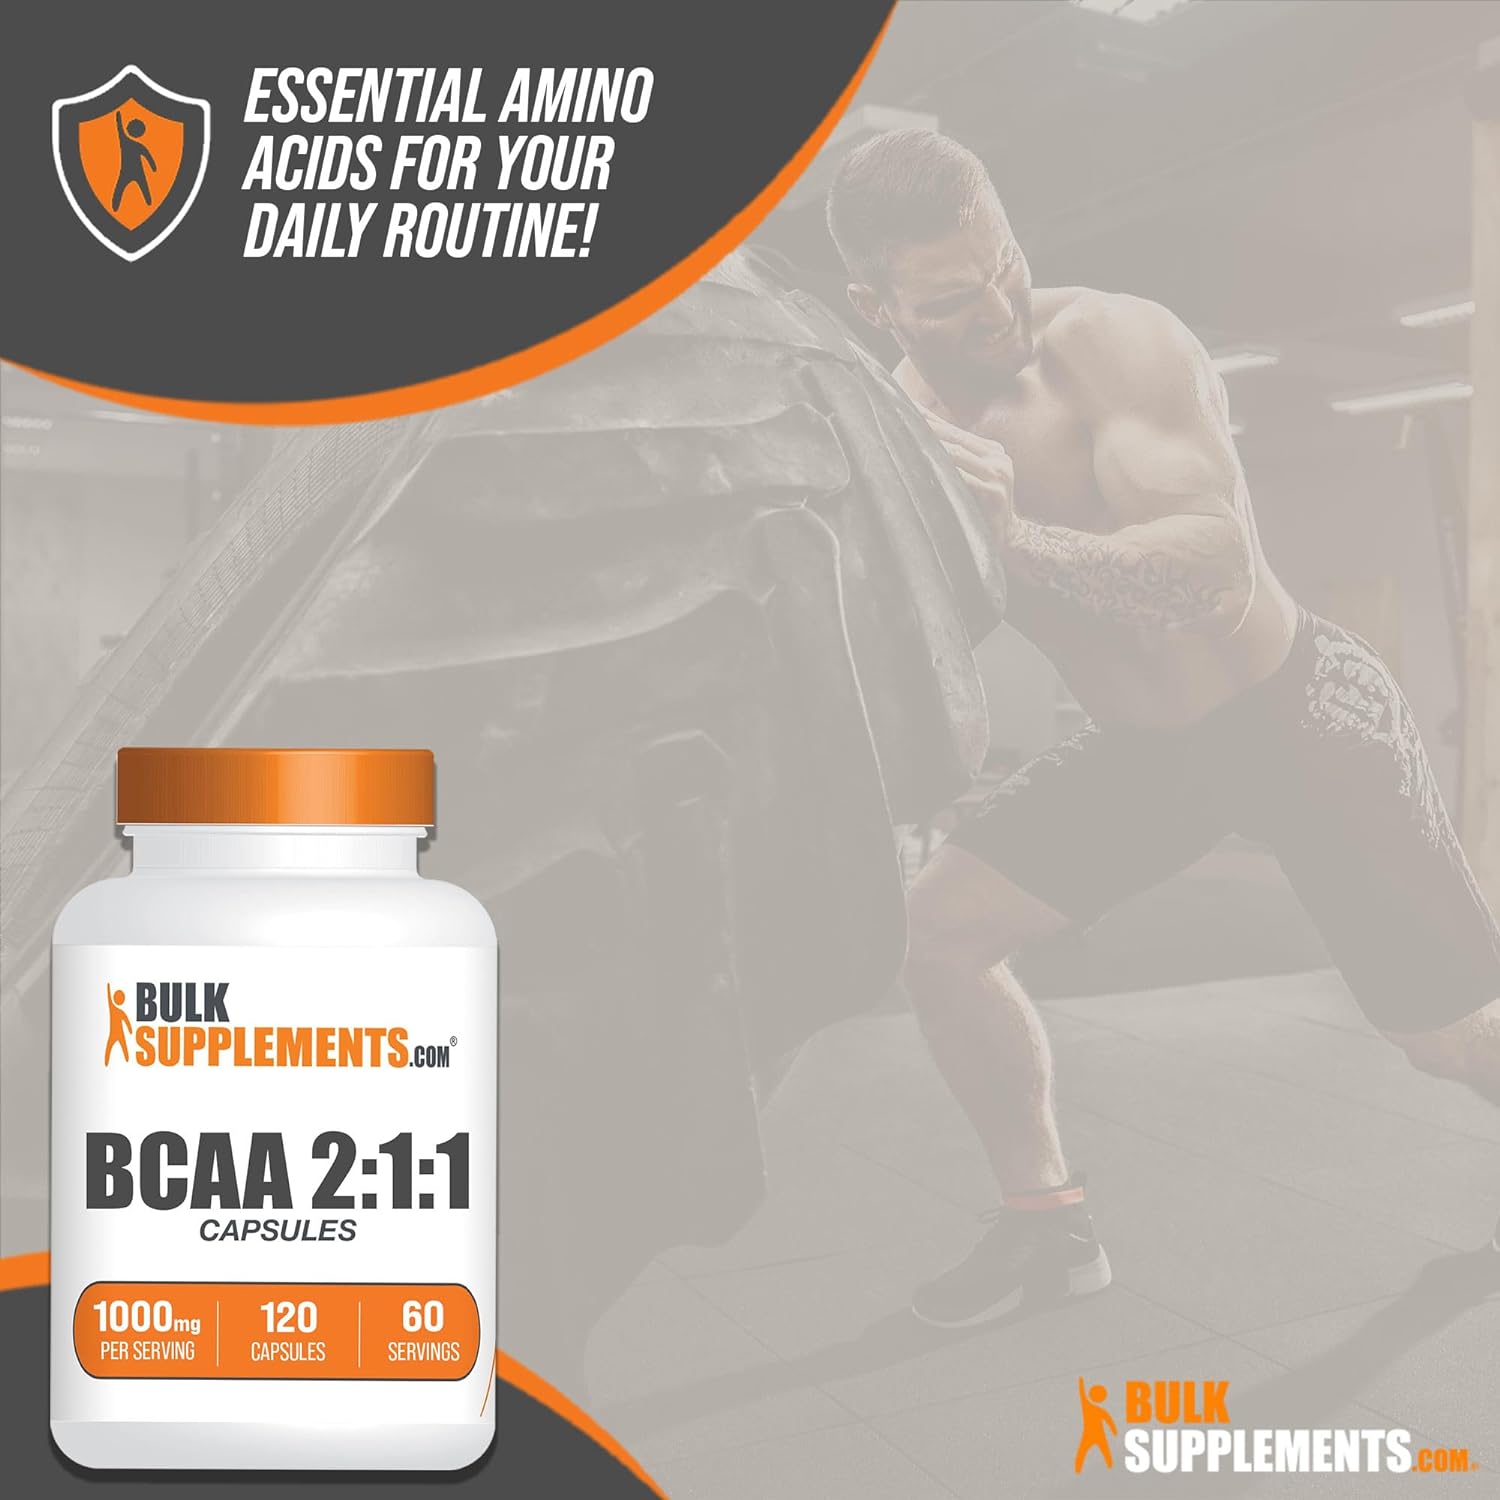 BULKSUPPLEMENTS.COM BCAA 2:1:1 Capsules - Branched Chain Amino Acids, 